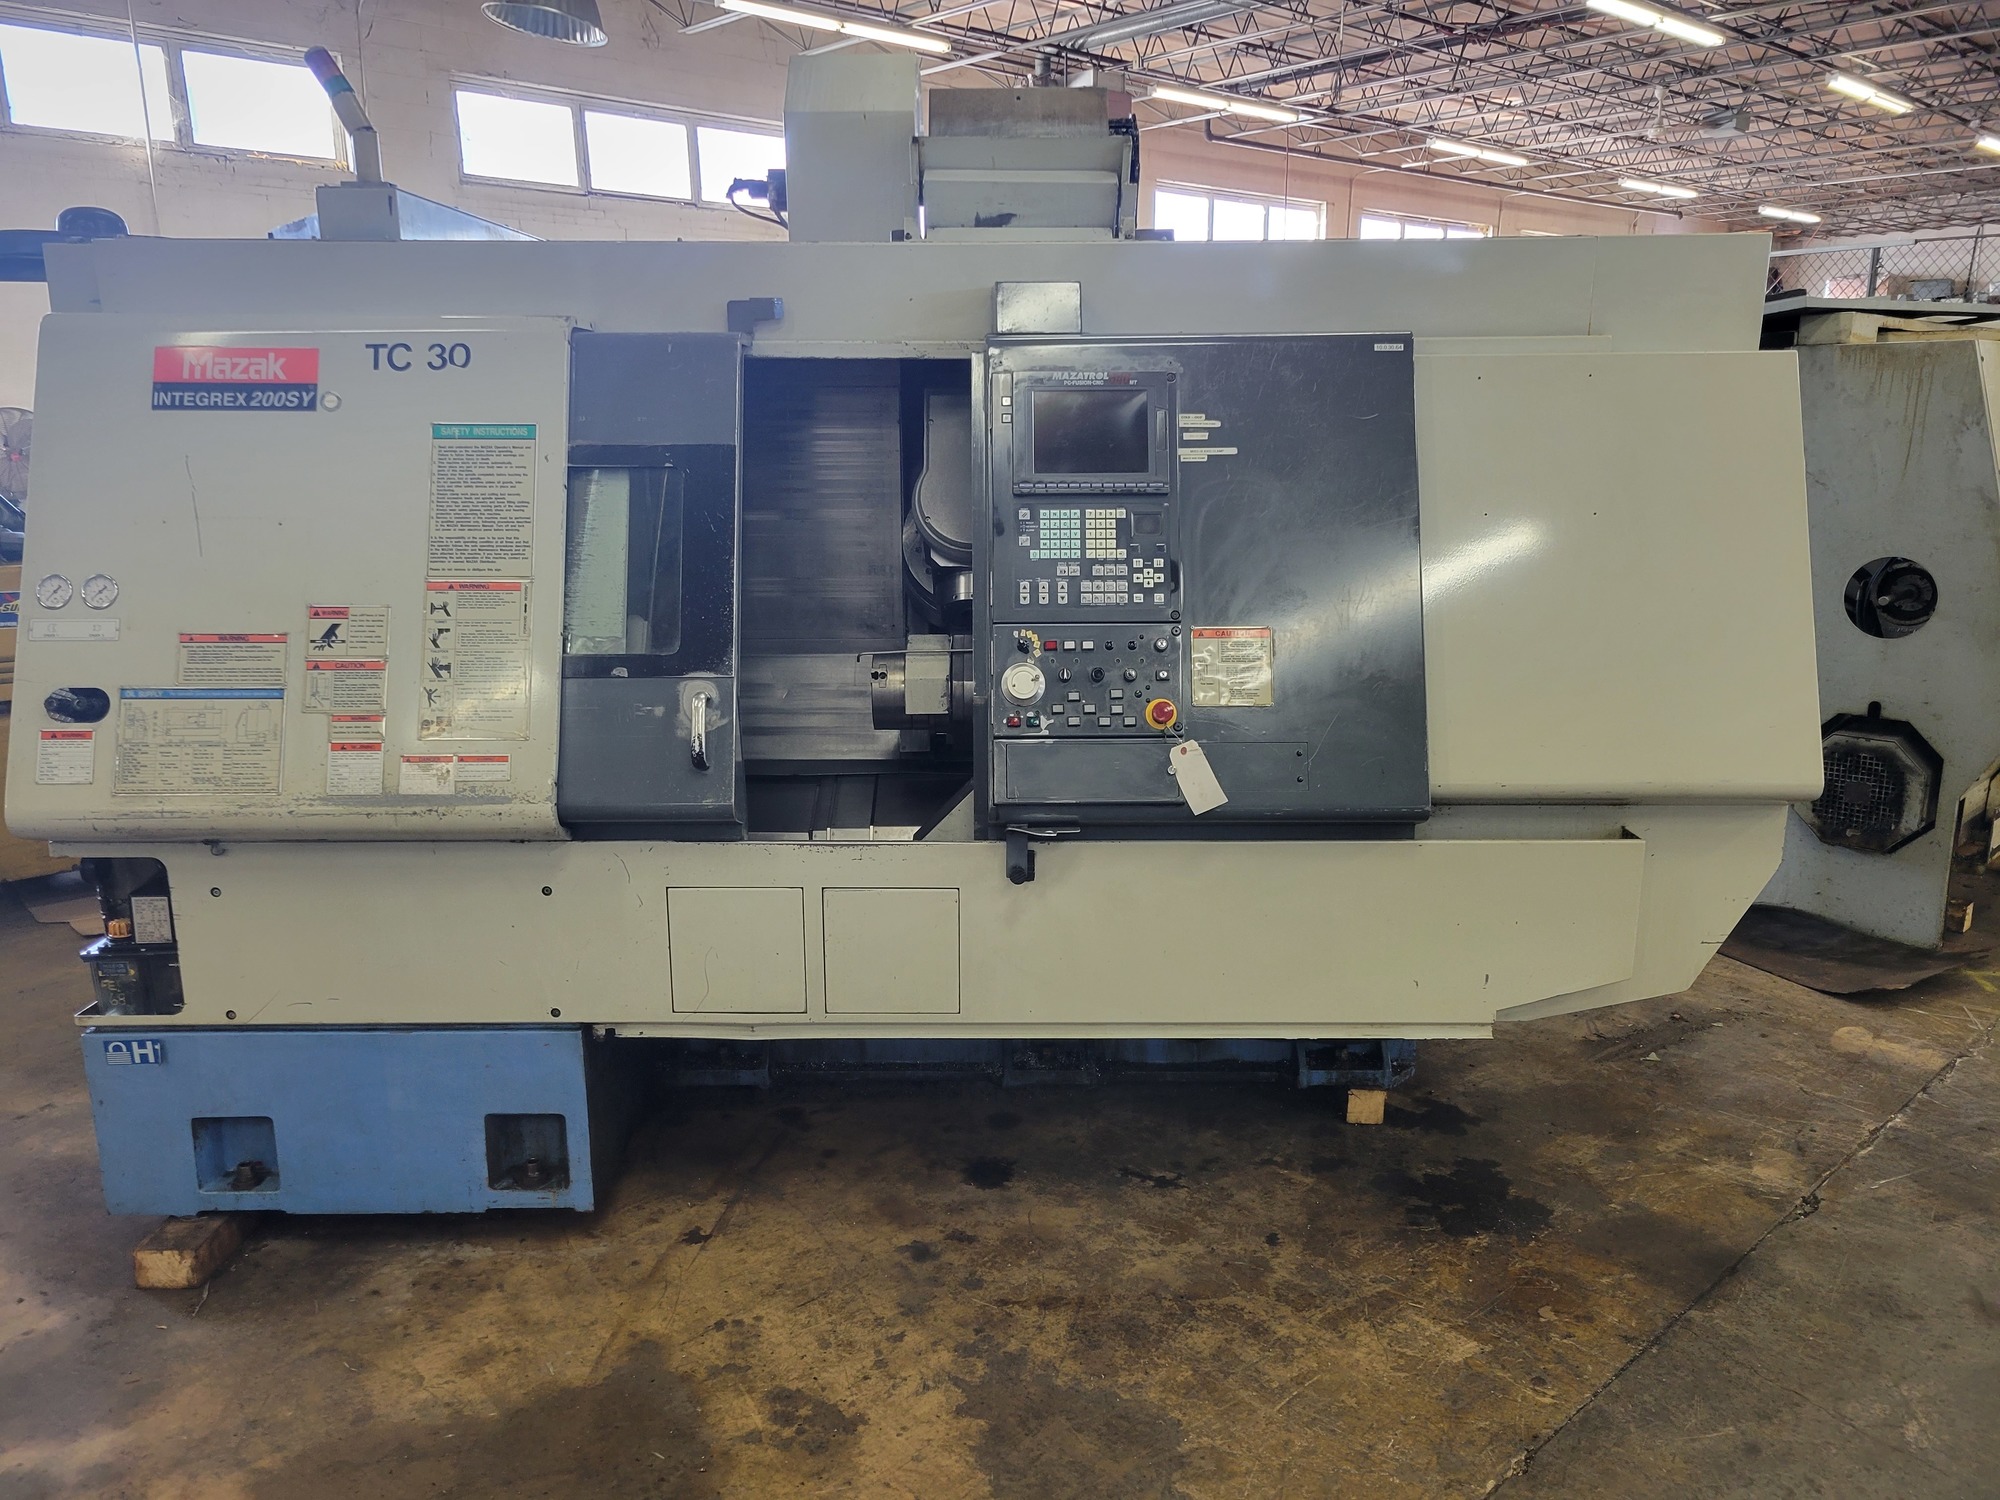 Mazak Integrex 200SY CNC Turn Mill Center 5-Axis or More CNC Lathes